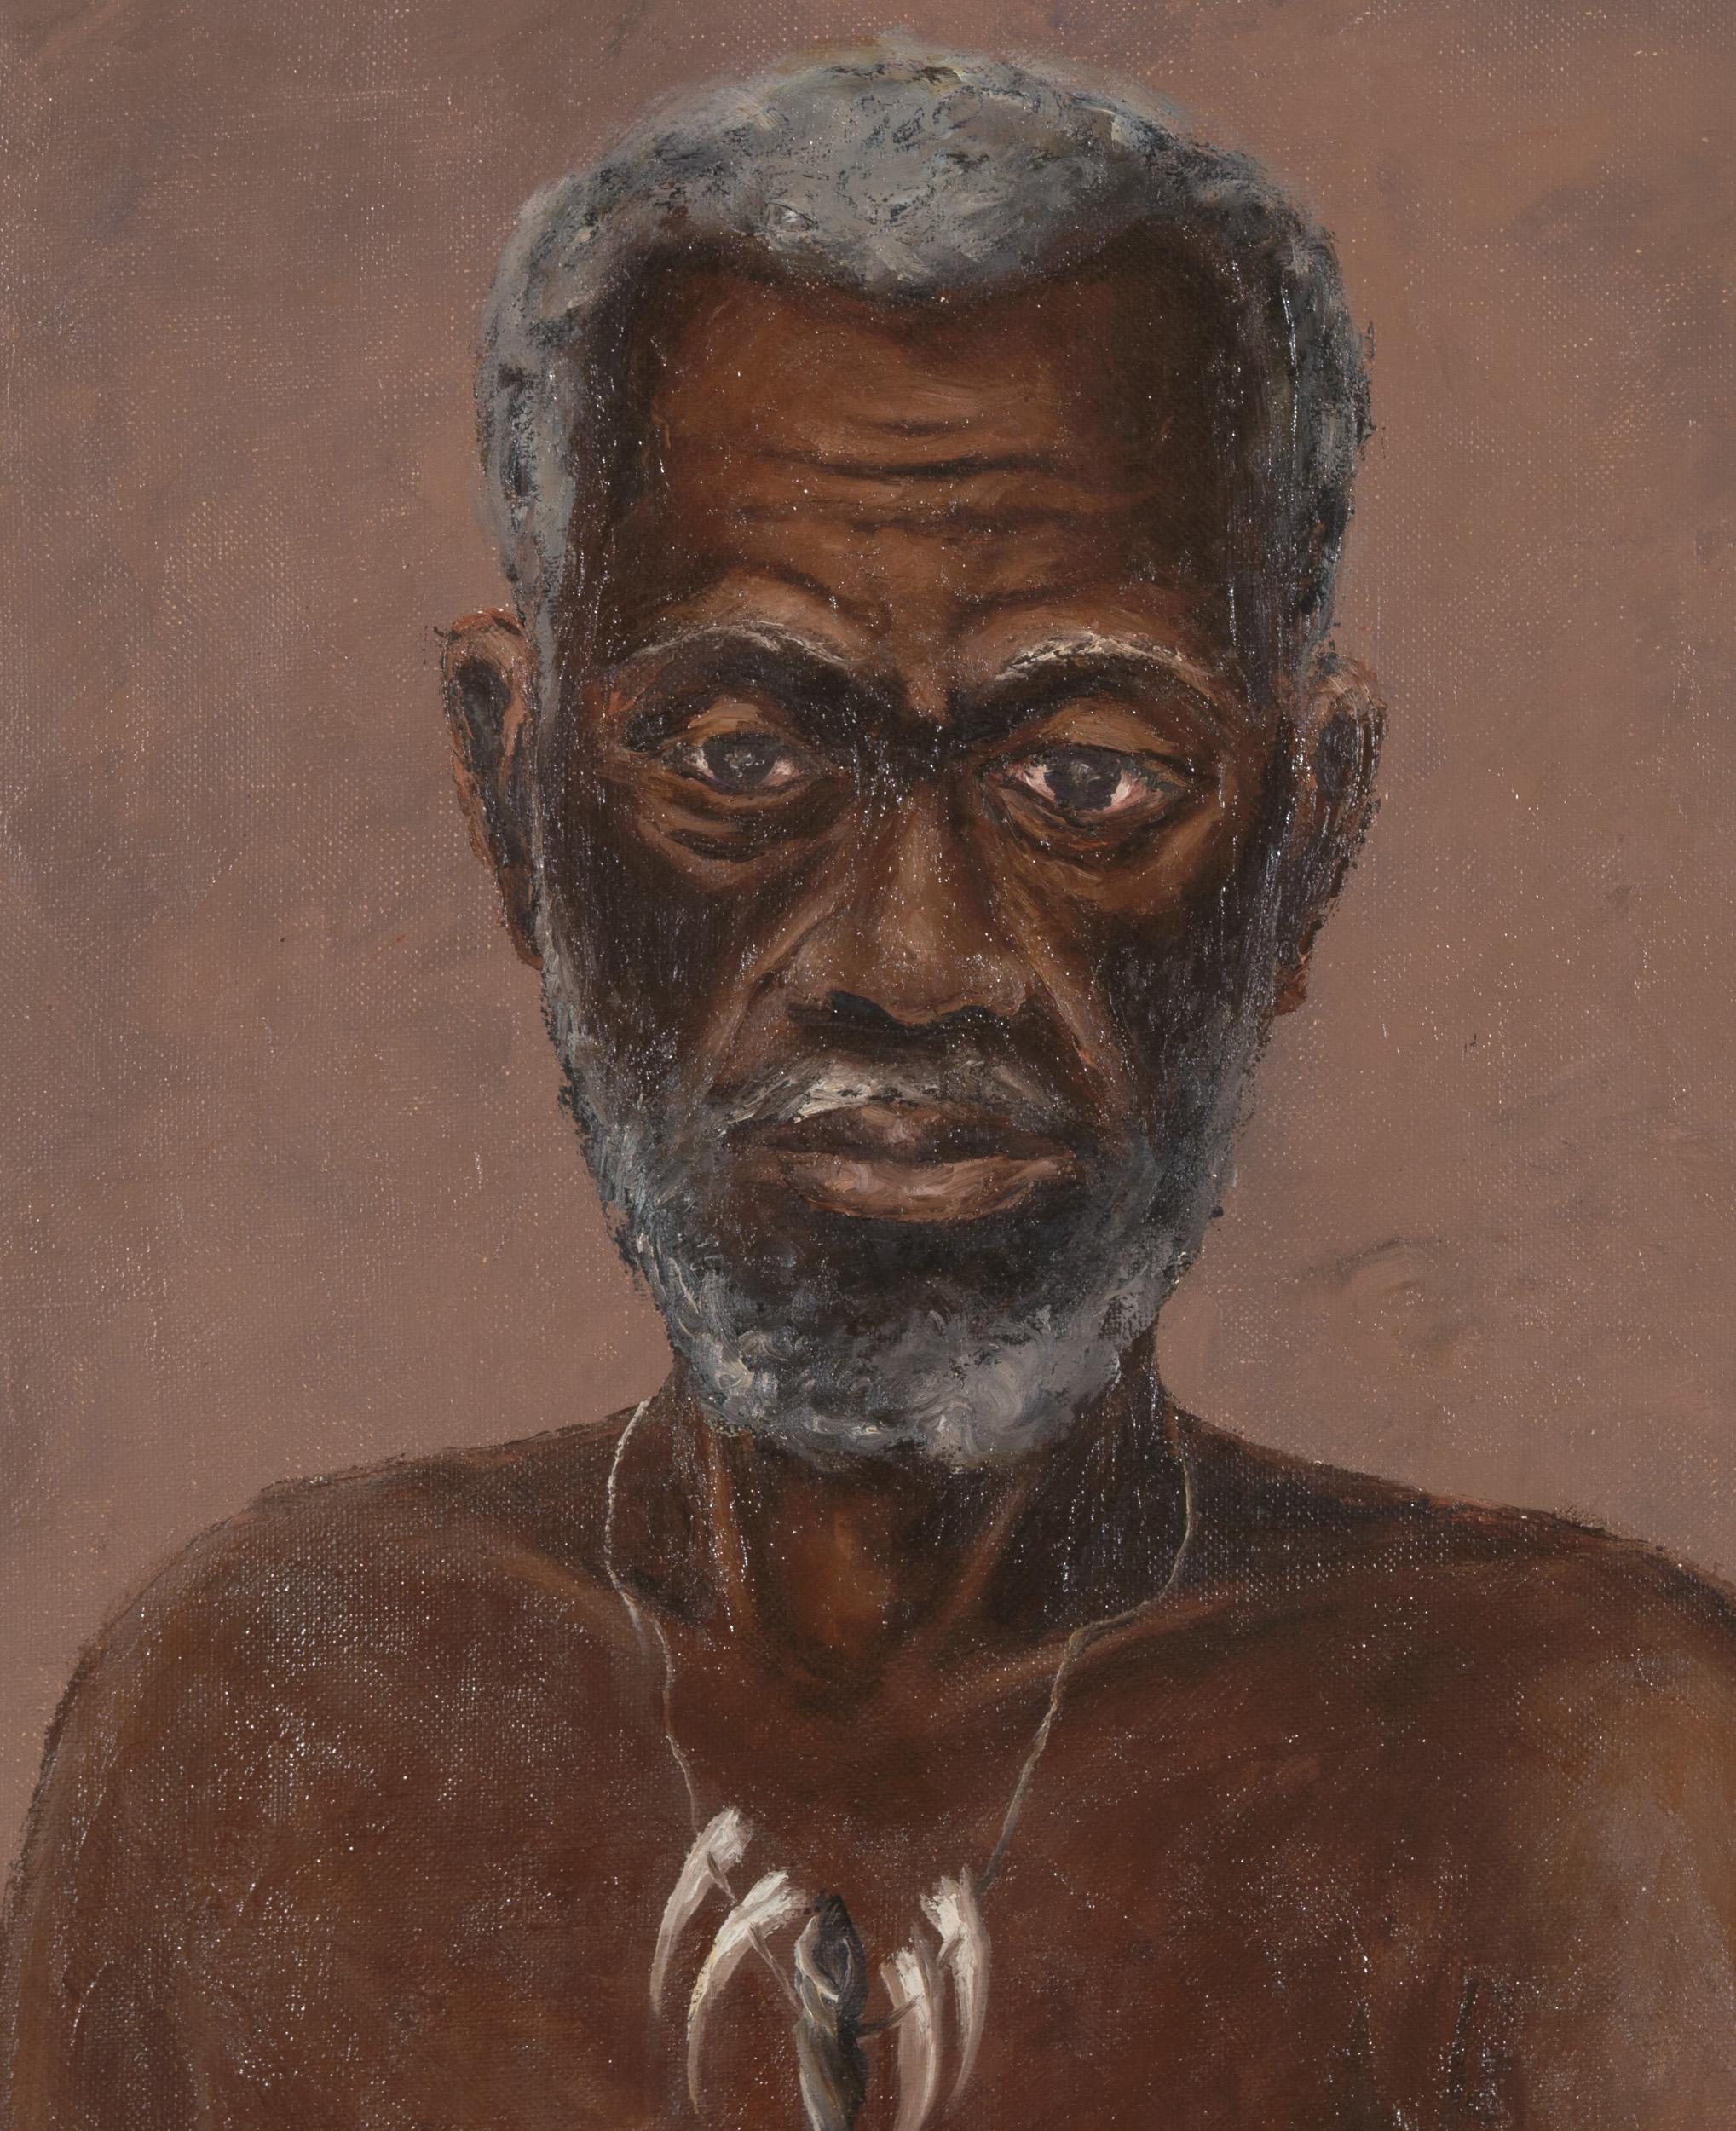 Marc Ngandu (Ngandu Muela Kabengi Babu) was born in 1934 in Luebo, went to high school in Luluabourg, and then took courses at the Ecole d'art de Ngandajika. Having proved to be a good draughtsman from a young age, he followed a few courses at